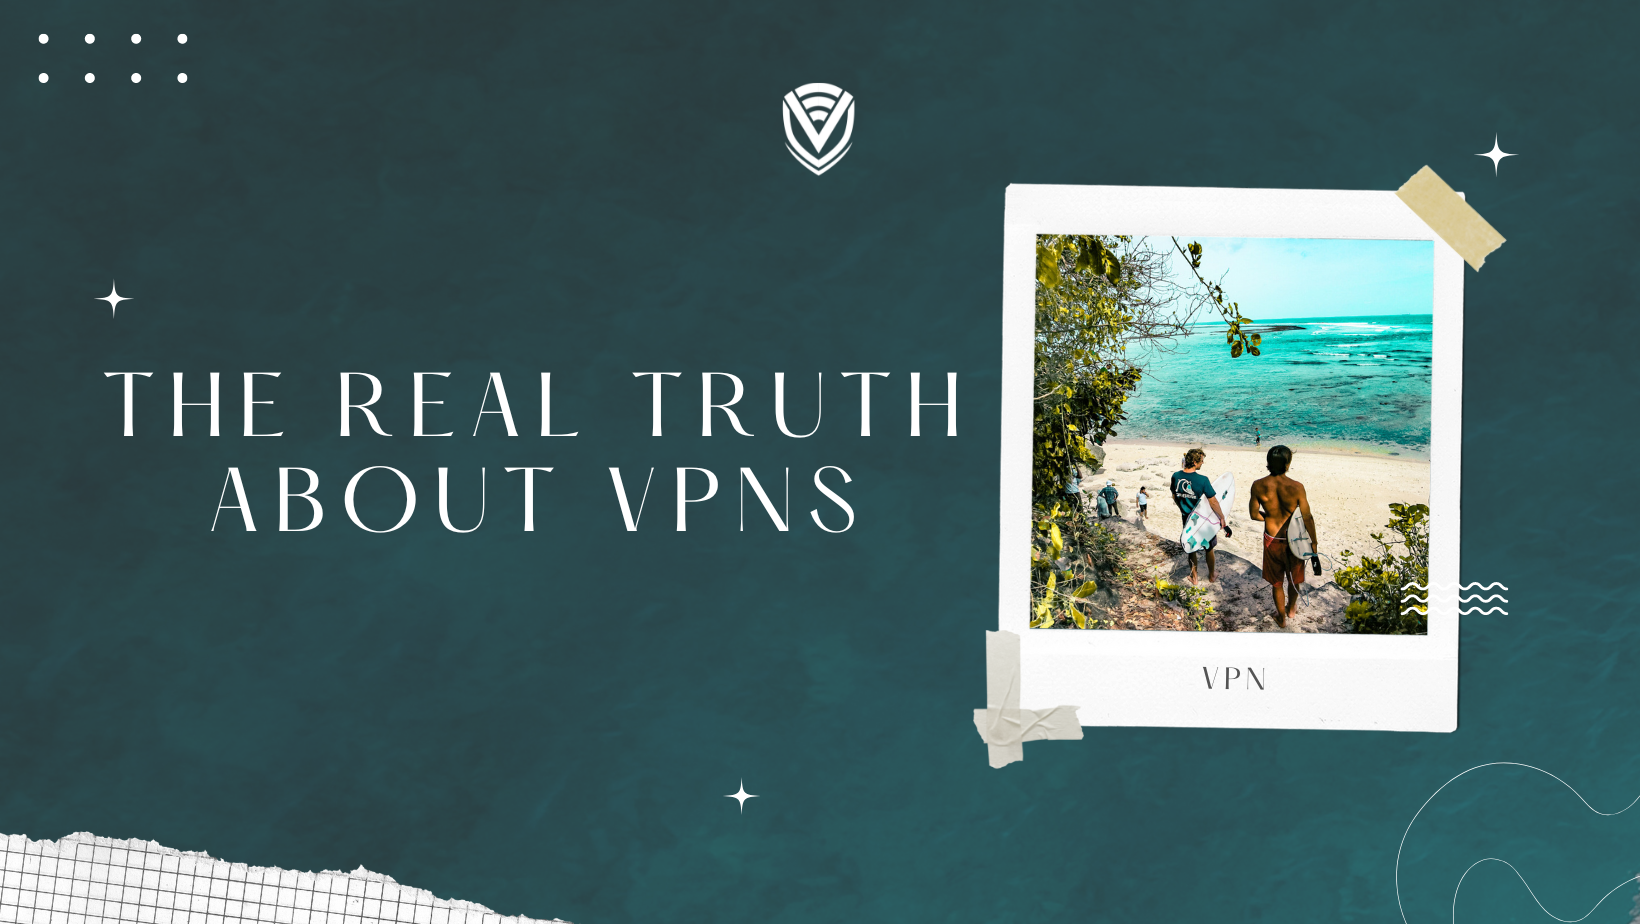 The Real Truth about VPNs